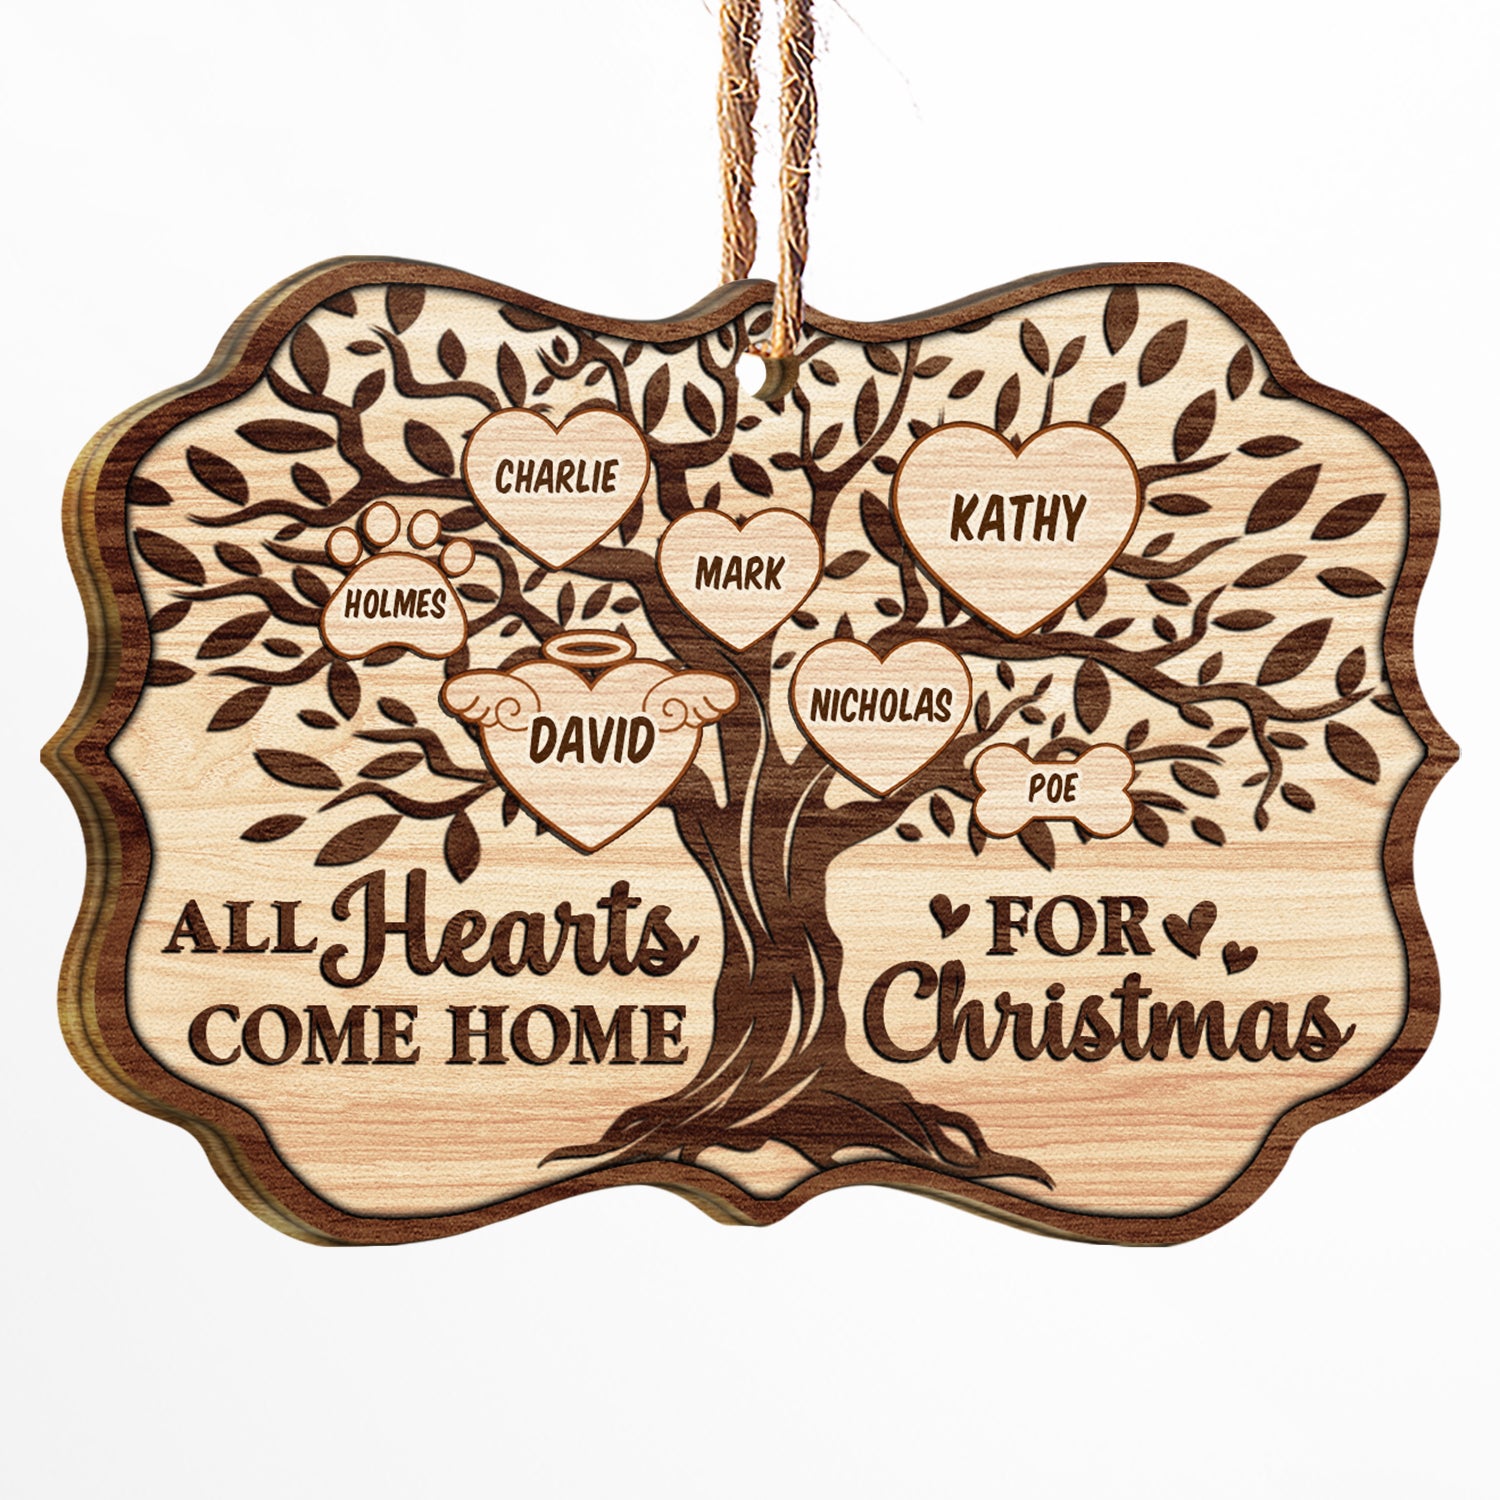 Christmas Family Tree All Hearts Come Home For Christmas - Memorial Gift For Family - Personalized Custom Wooden Ornament